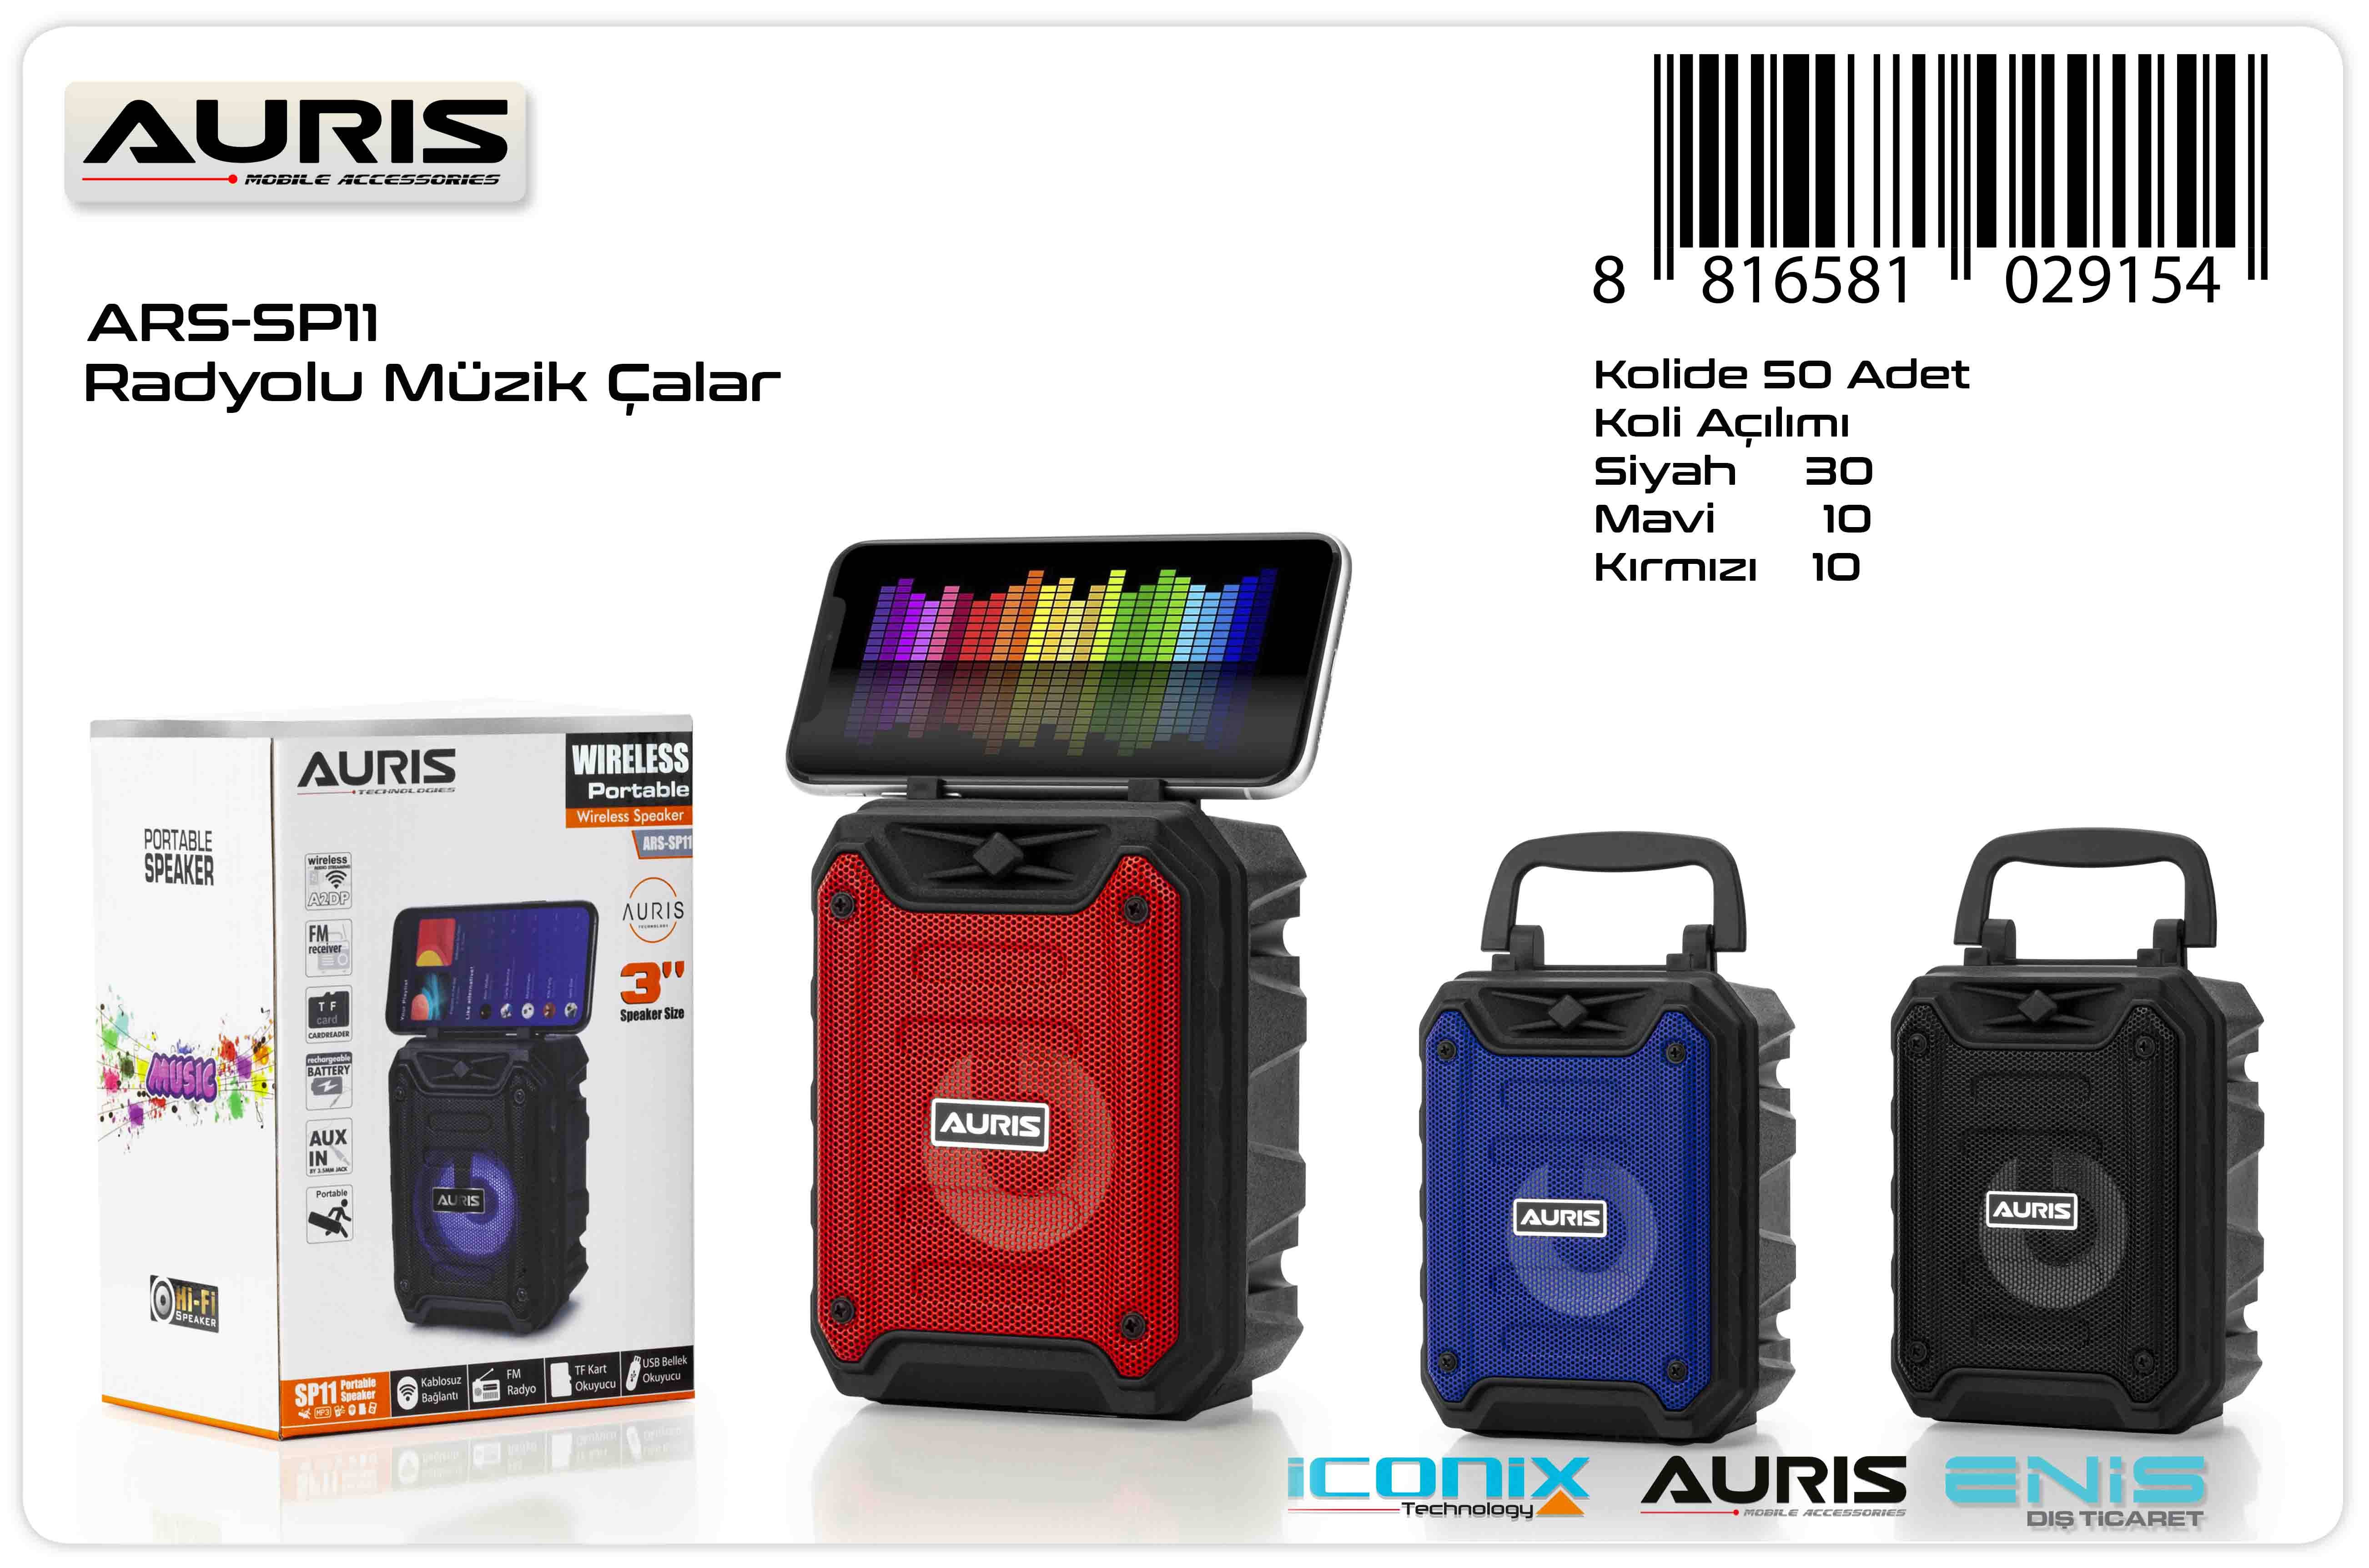 ARS-SP11 SPEAKER AURIS ALSO STAND FOR SMARTPHONE